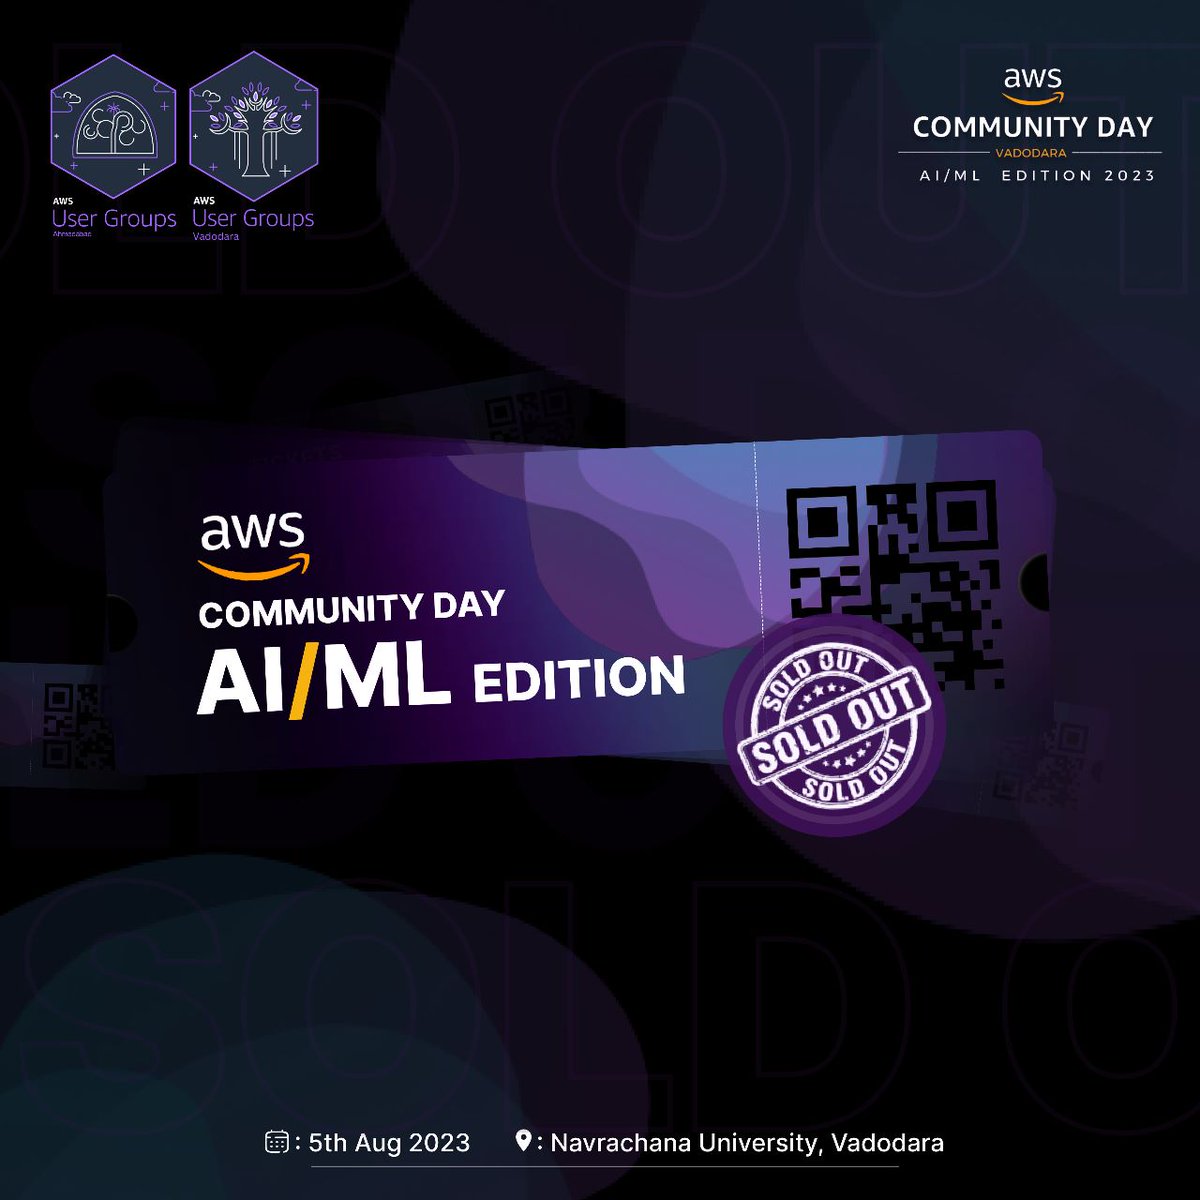 🚀💥 Tickets SOLD OUT! 🎟️💨

📢 Excitement overload as we announce that tickets for AWS Community Day AI/ML Edition Vadodara 2023 have SOLD OUT! 🎉🙌

Follow us for more updates 👉 linktr.ee/awsugvadodara

#AWSCommunityDay #AIandML #SoldOut #ExcitementUnleashed #Networking #aws